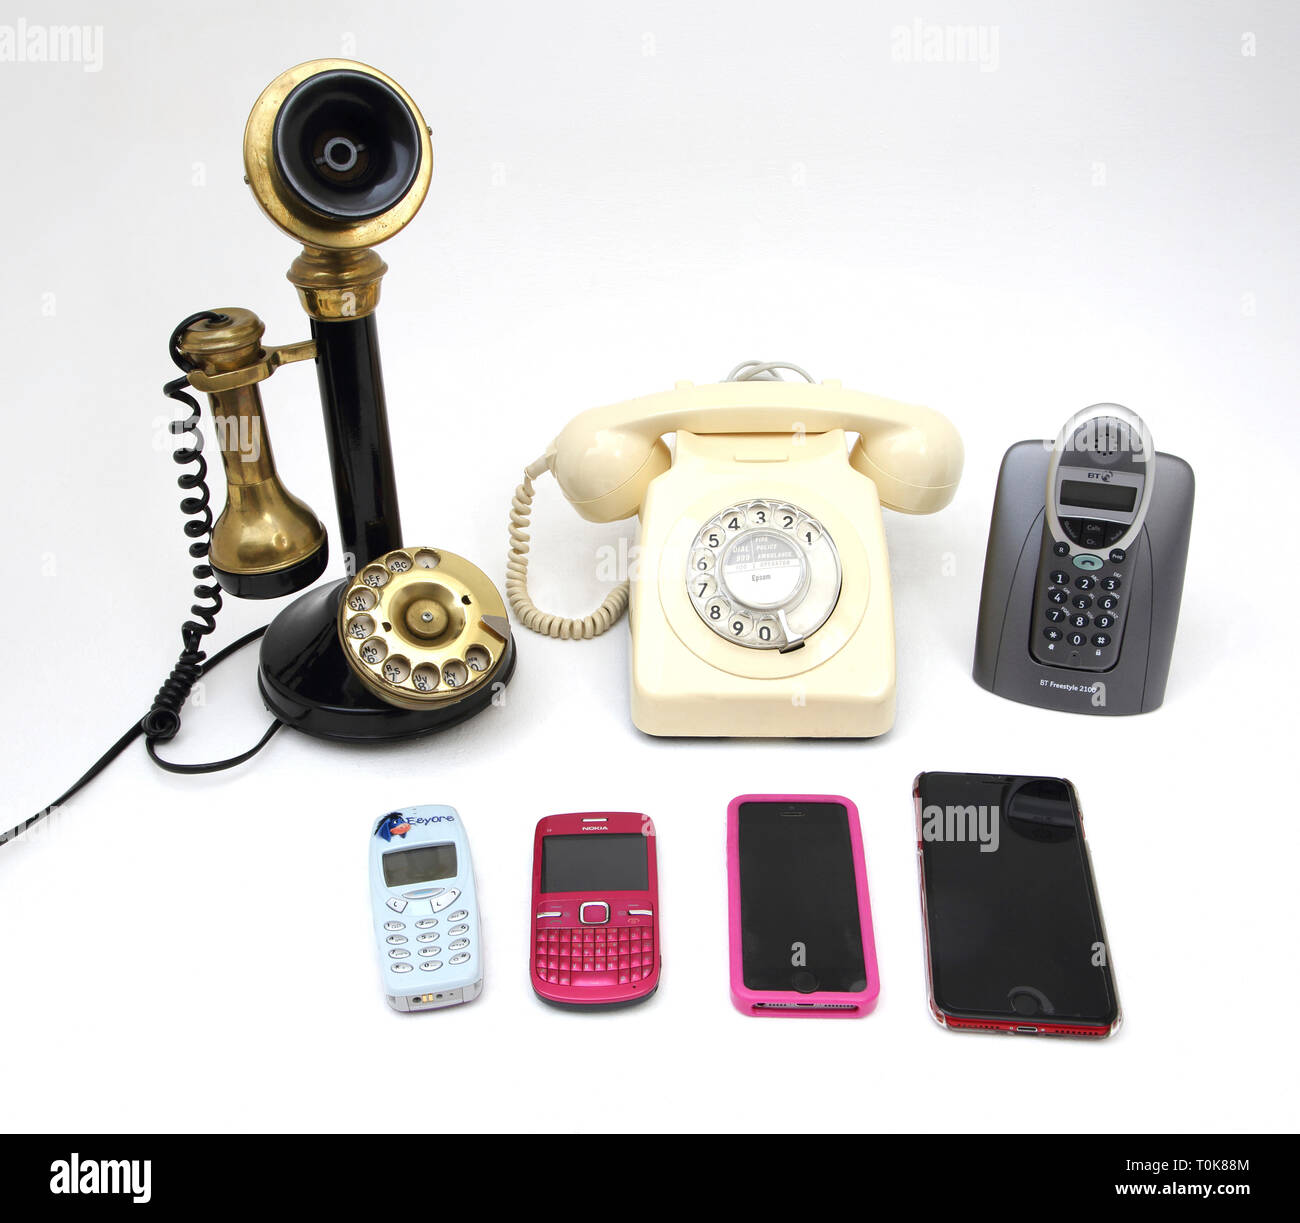 A Collection of Telephones Old and New - Candlestick Telephone, Rotary Dial Telephone, Cordless Telephone and Mobiles - Nokia 3310, Nokia C3, iPhone 5 Stock Photo